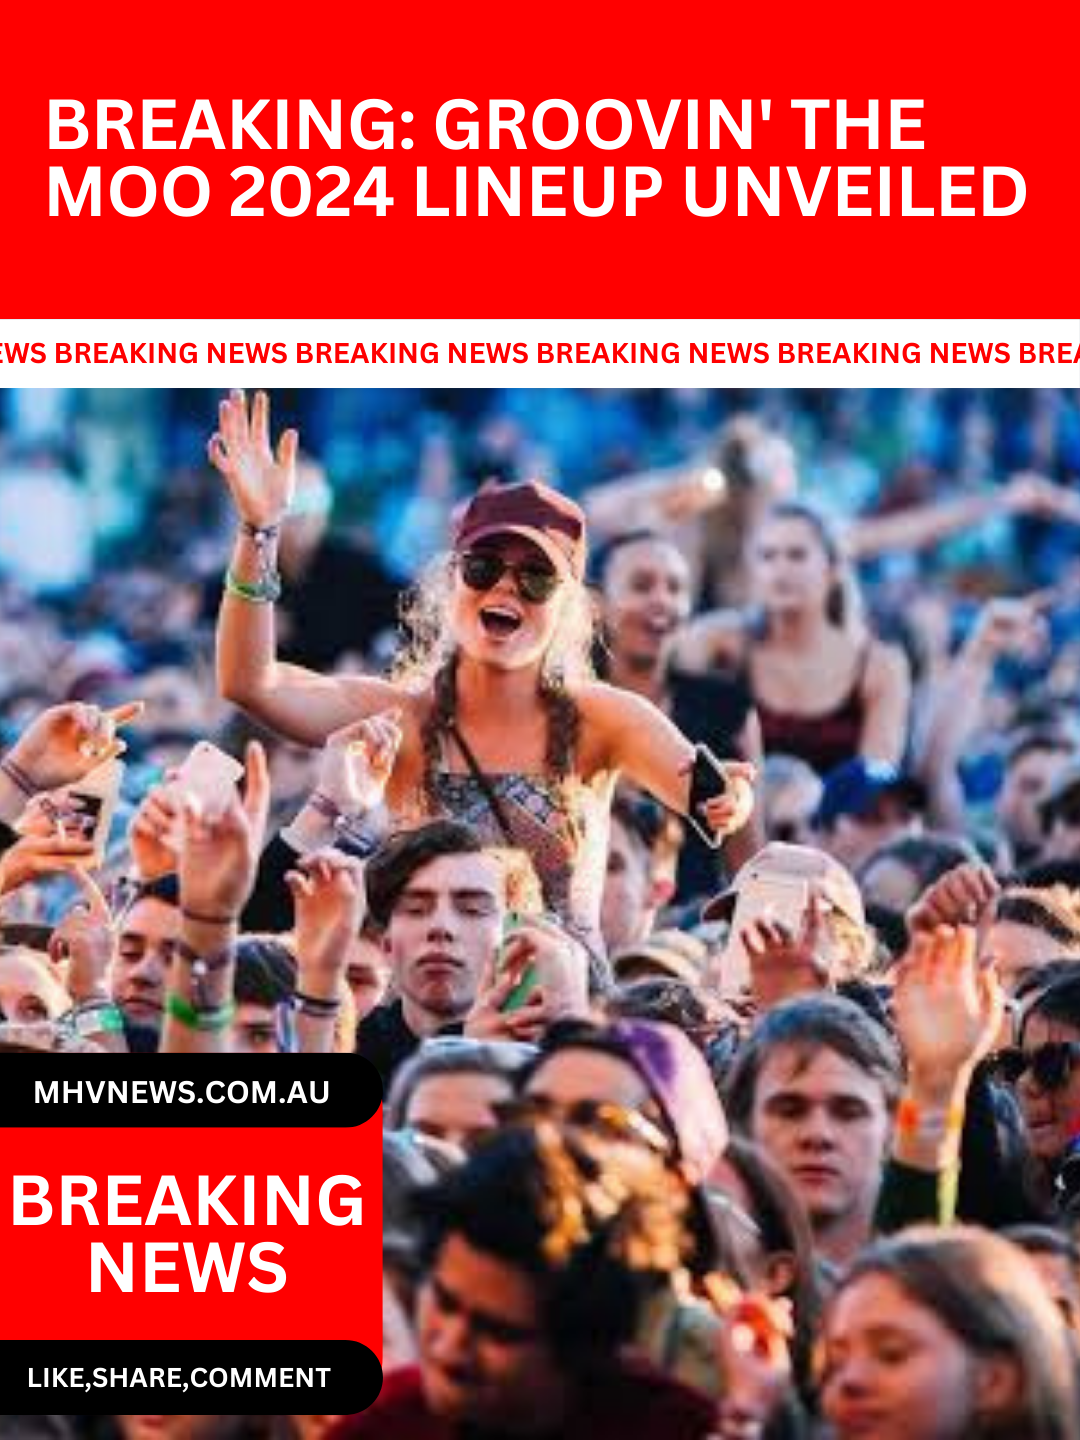 You are currently viewing Breaking: Groovin’ the Moo 2024 Lineup Unveiled